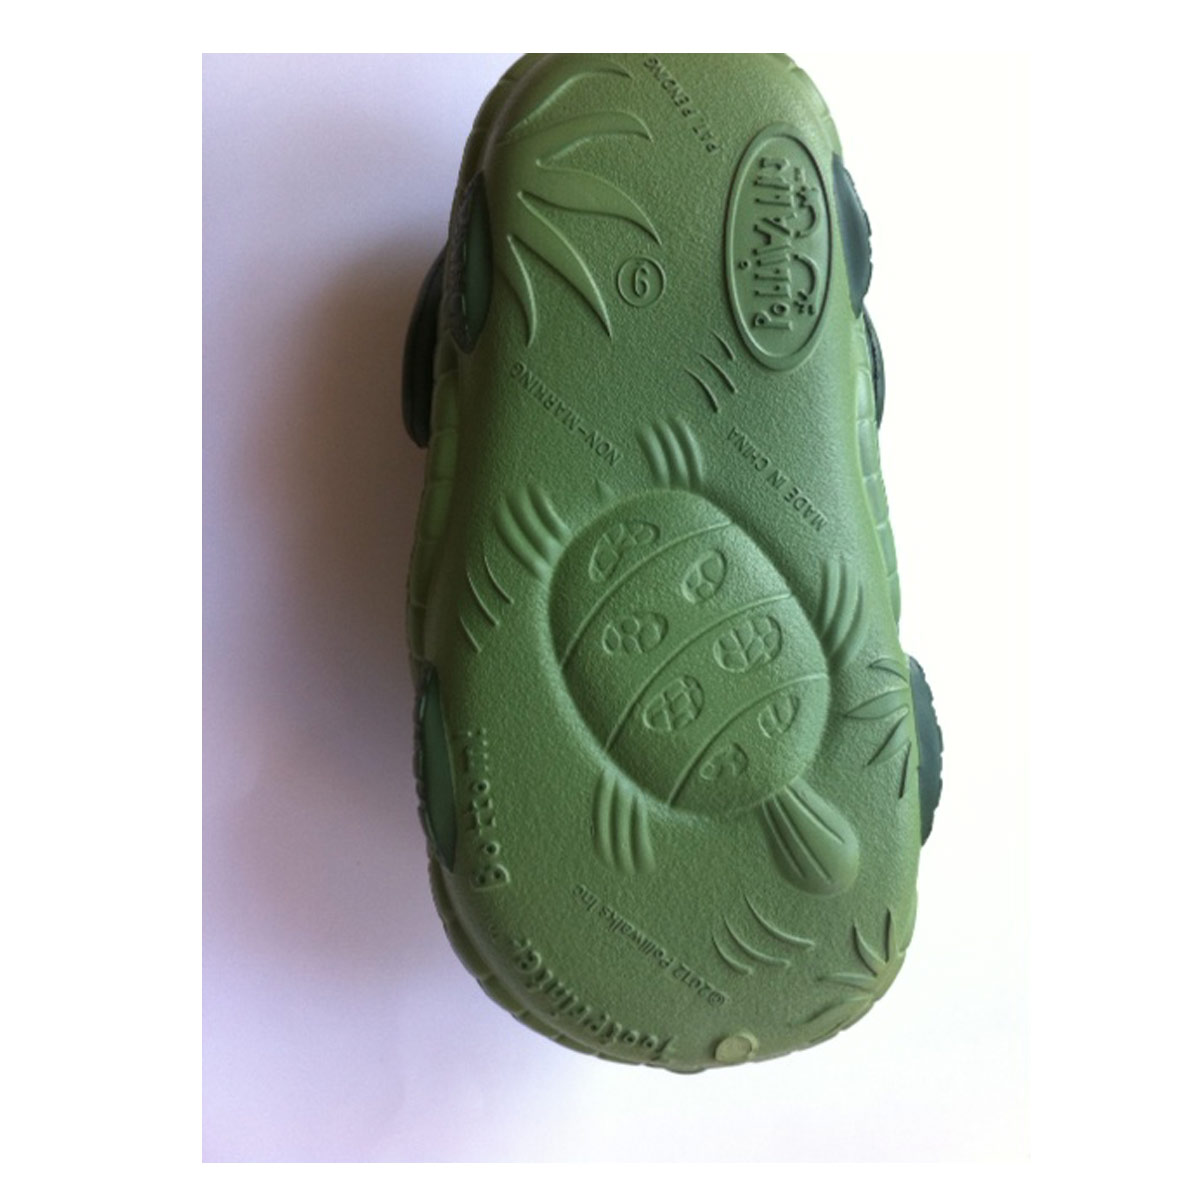 Polliwalks : Toddler shoes Timmy the Turtle Green # 8